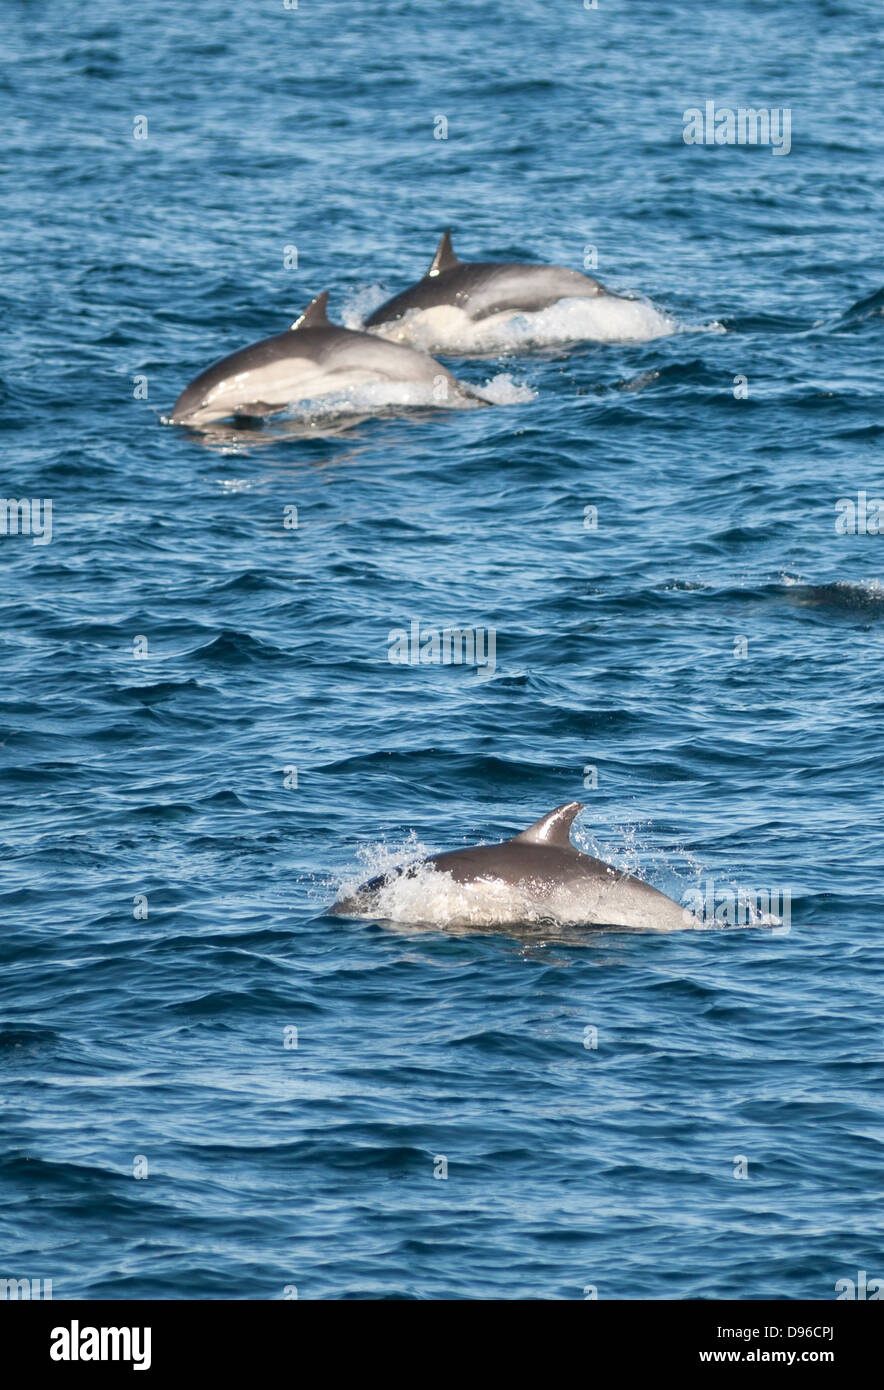 Dolphins in the Pacific near San Diego, California, United States of America Stock Photo